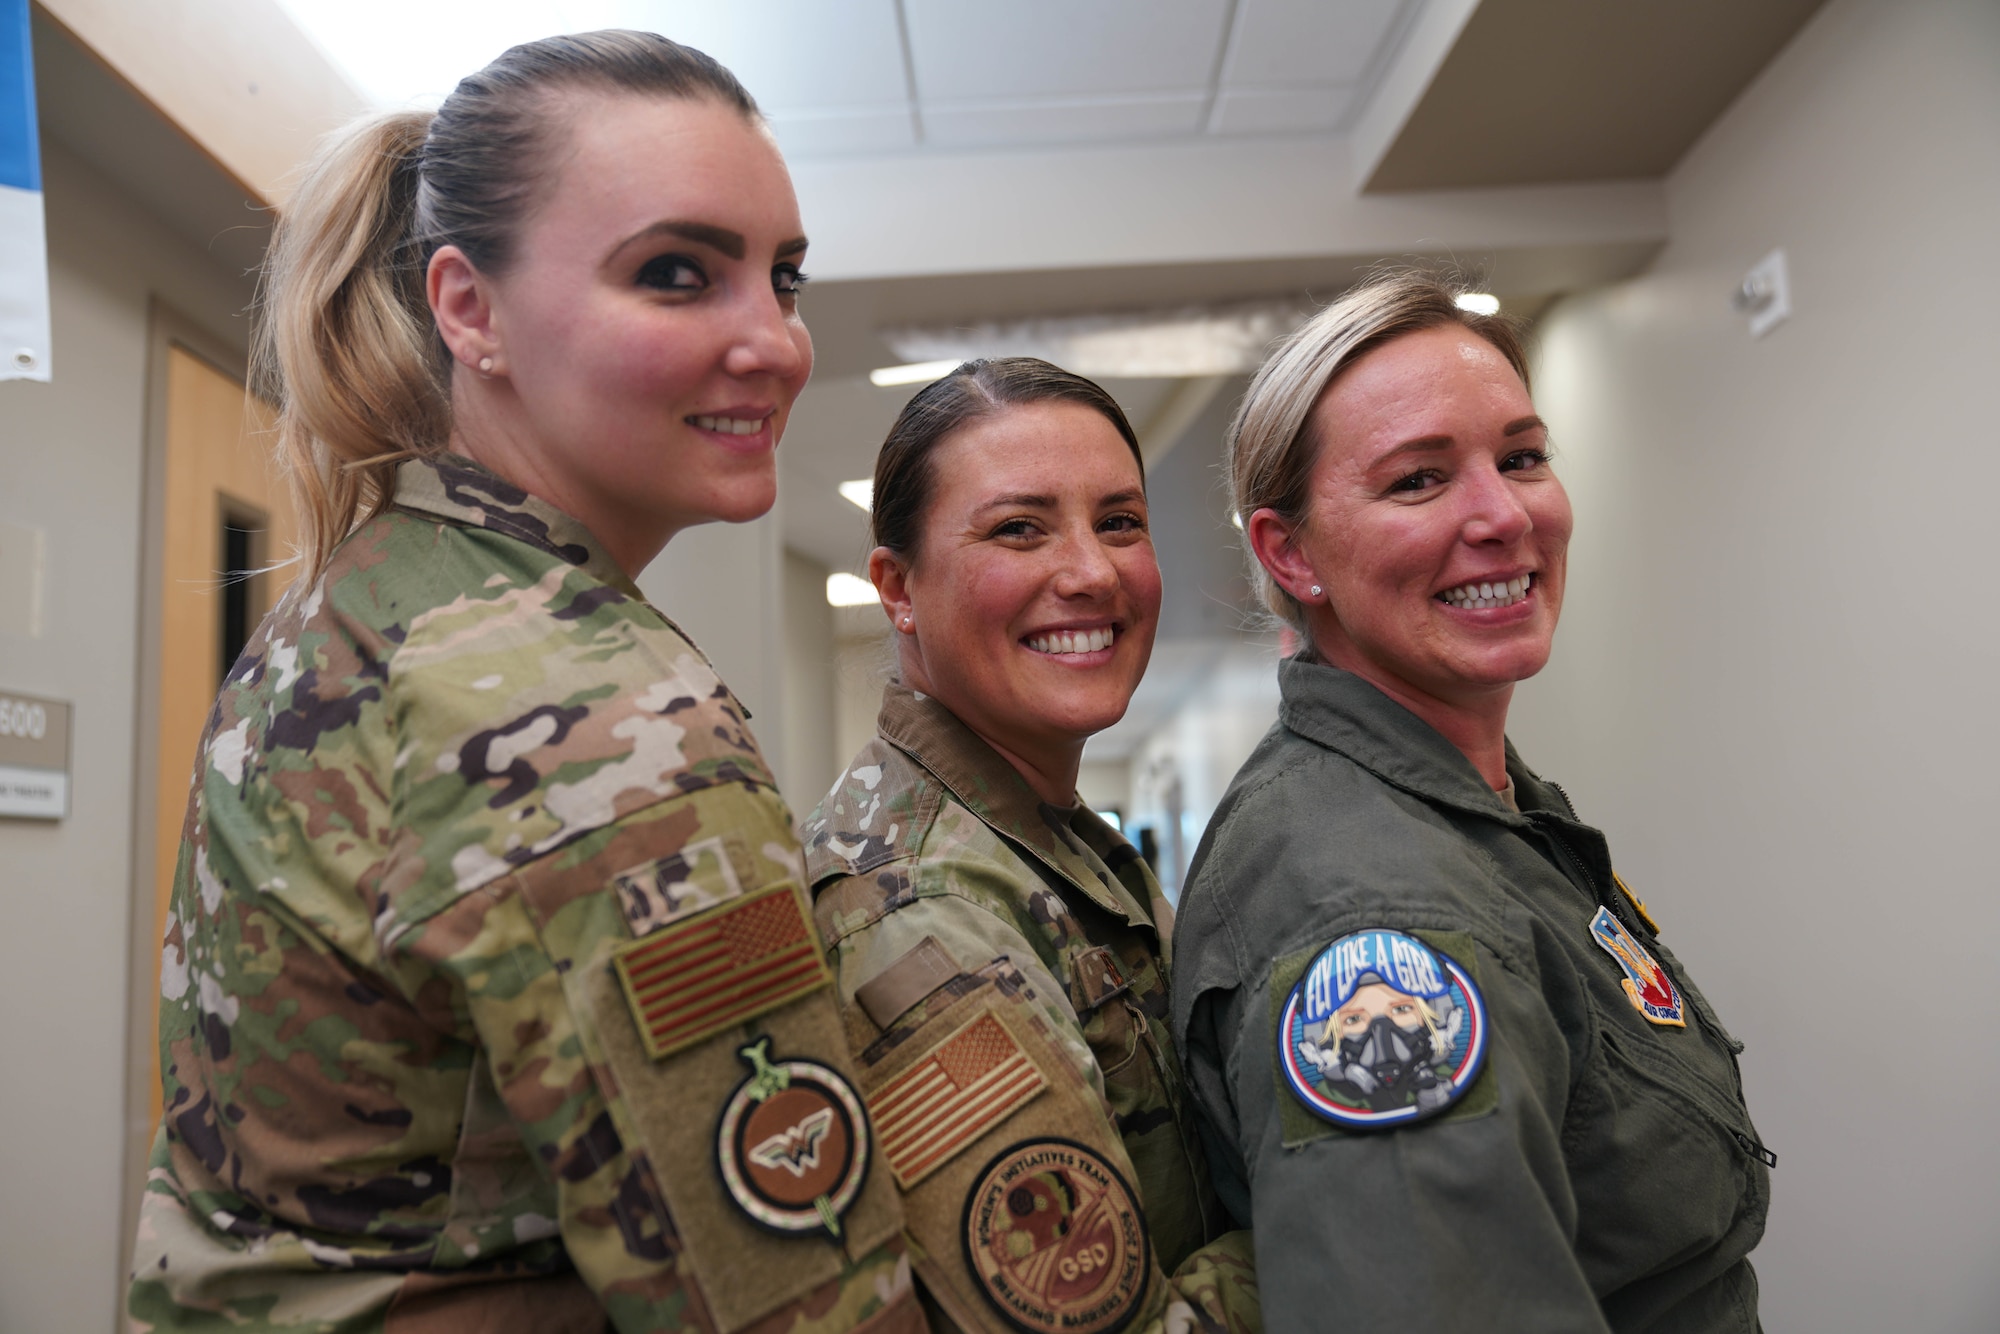 U.S. Air Force Women's Initiative Team (WIT) council members, assigned to the 432nd Wing, show off their WIT patches at Creech Air Force Base, Nev., Oct. 27, 2022. The WIT is composed of volunteers dedicated to identifying and eliminating barriers to women’s service in the Department of the Air Force and Department of Defense while building a community of leadership and a network of allies and support agencies. (U.S. Air Force photo by Airman 1st Class Ariel O'Shea)